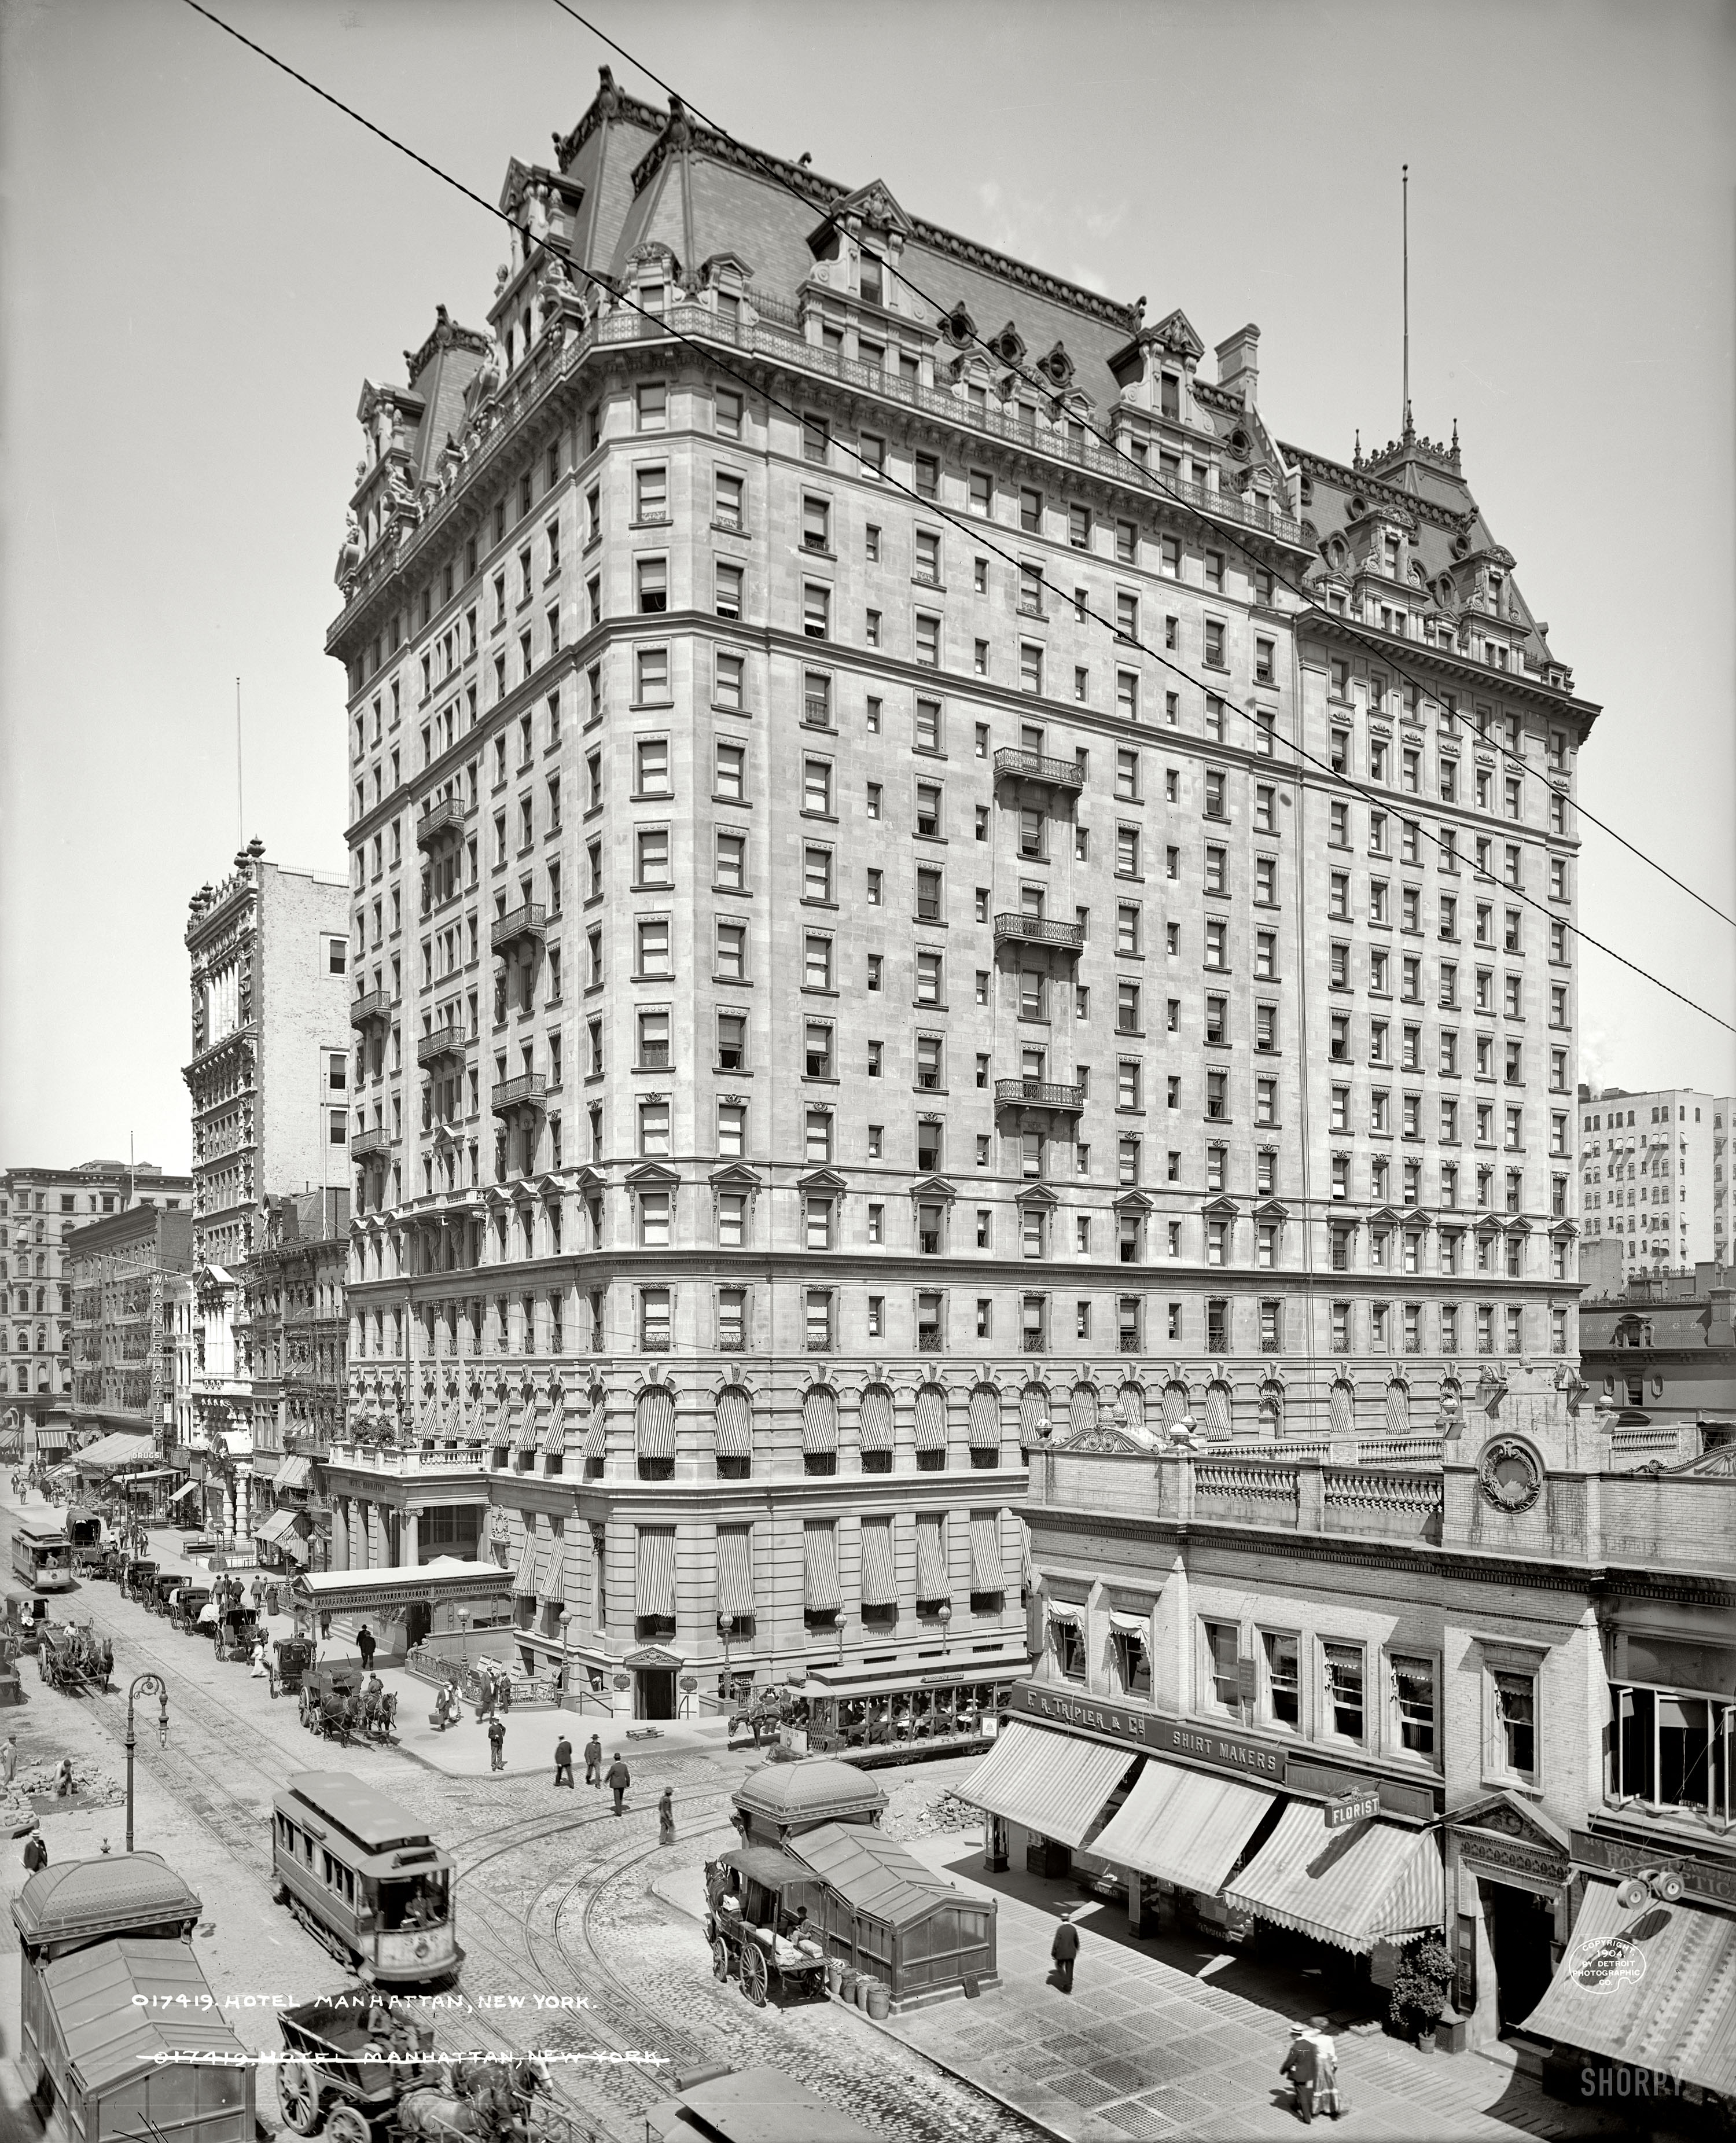 New York circa 1904. "Hotel Manhattan, 42nd Street."  Another architectural view with many interesting details being peripheral to the subject at hand. 8x10 inch dry plate glass negative, Detroit Publishing Co. View full size.